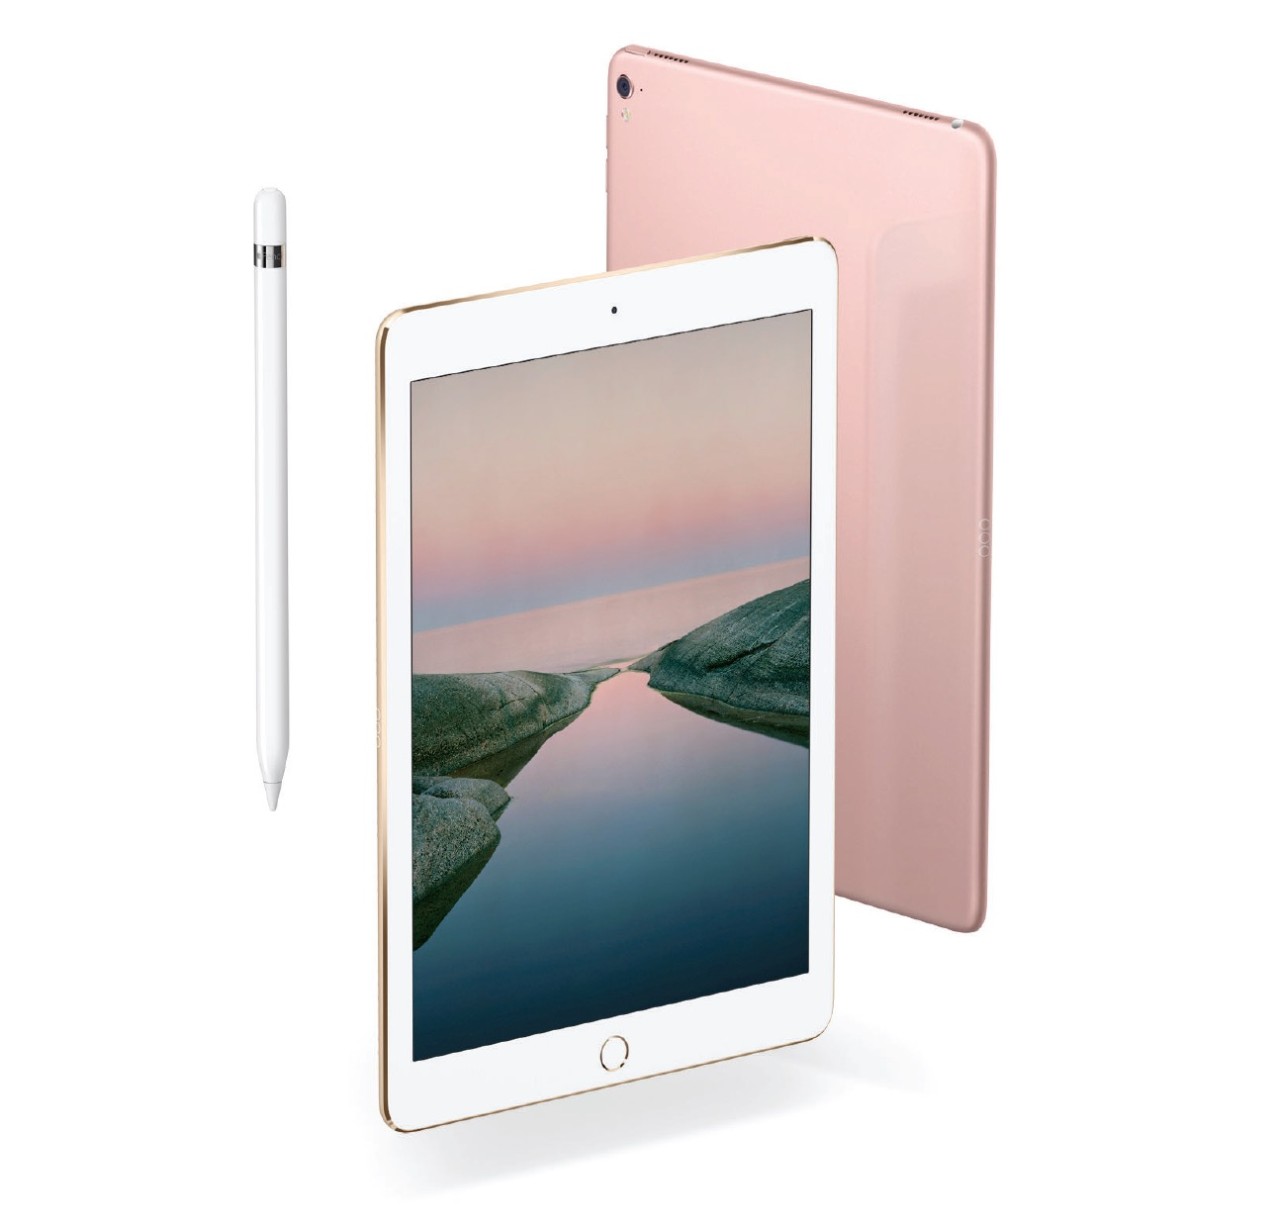 The Apple 9.7-inch iPad Pro Goes Smaller, Gets Better